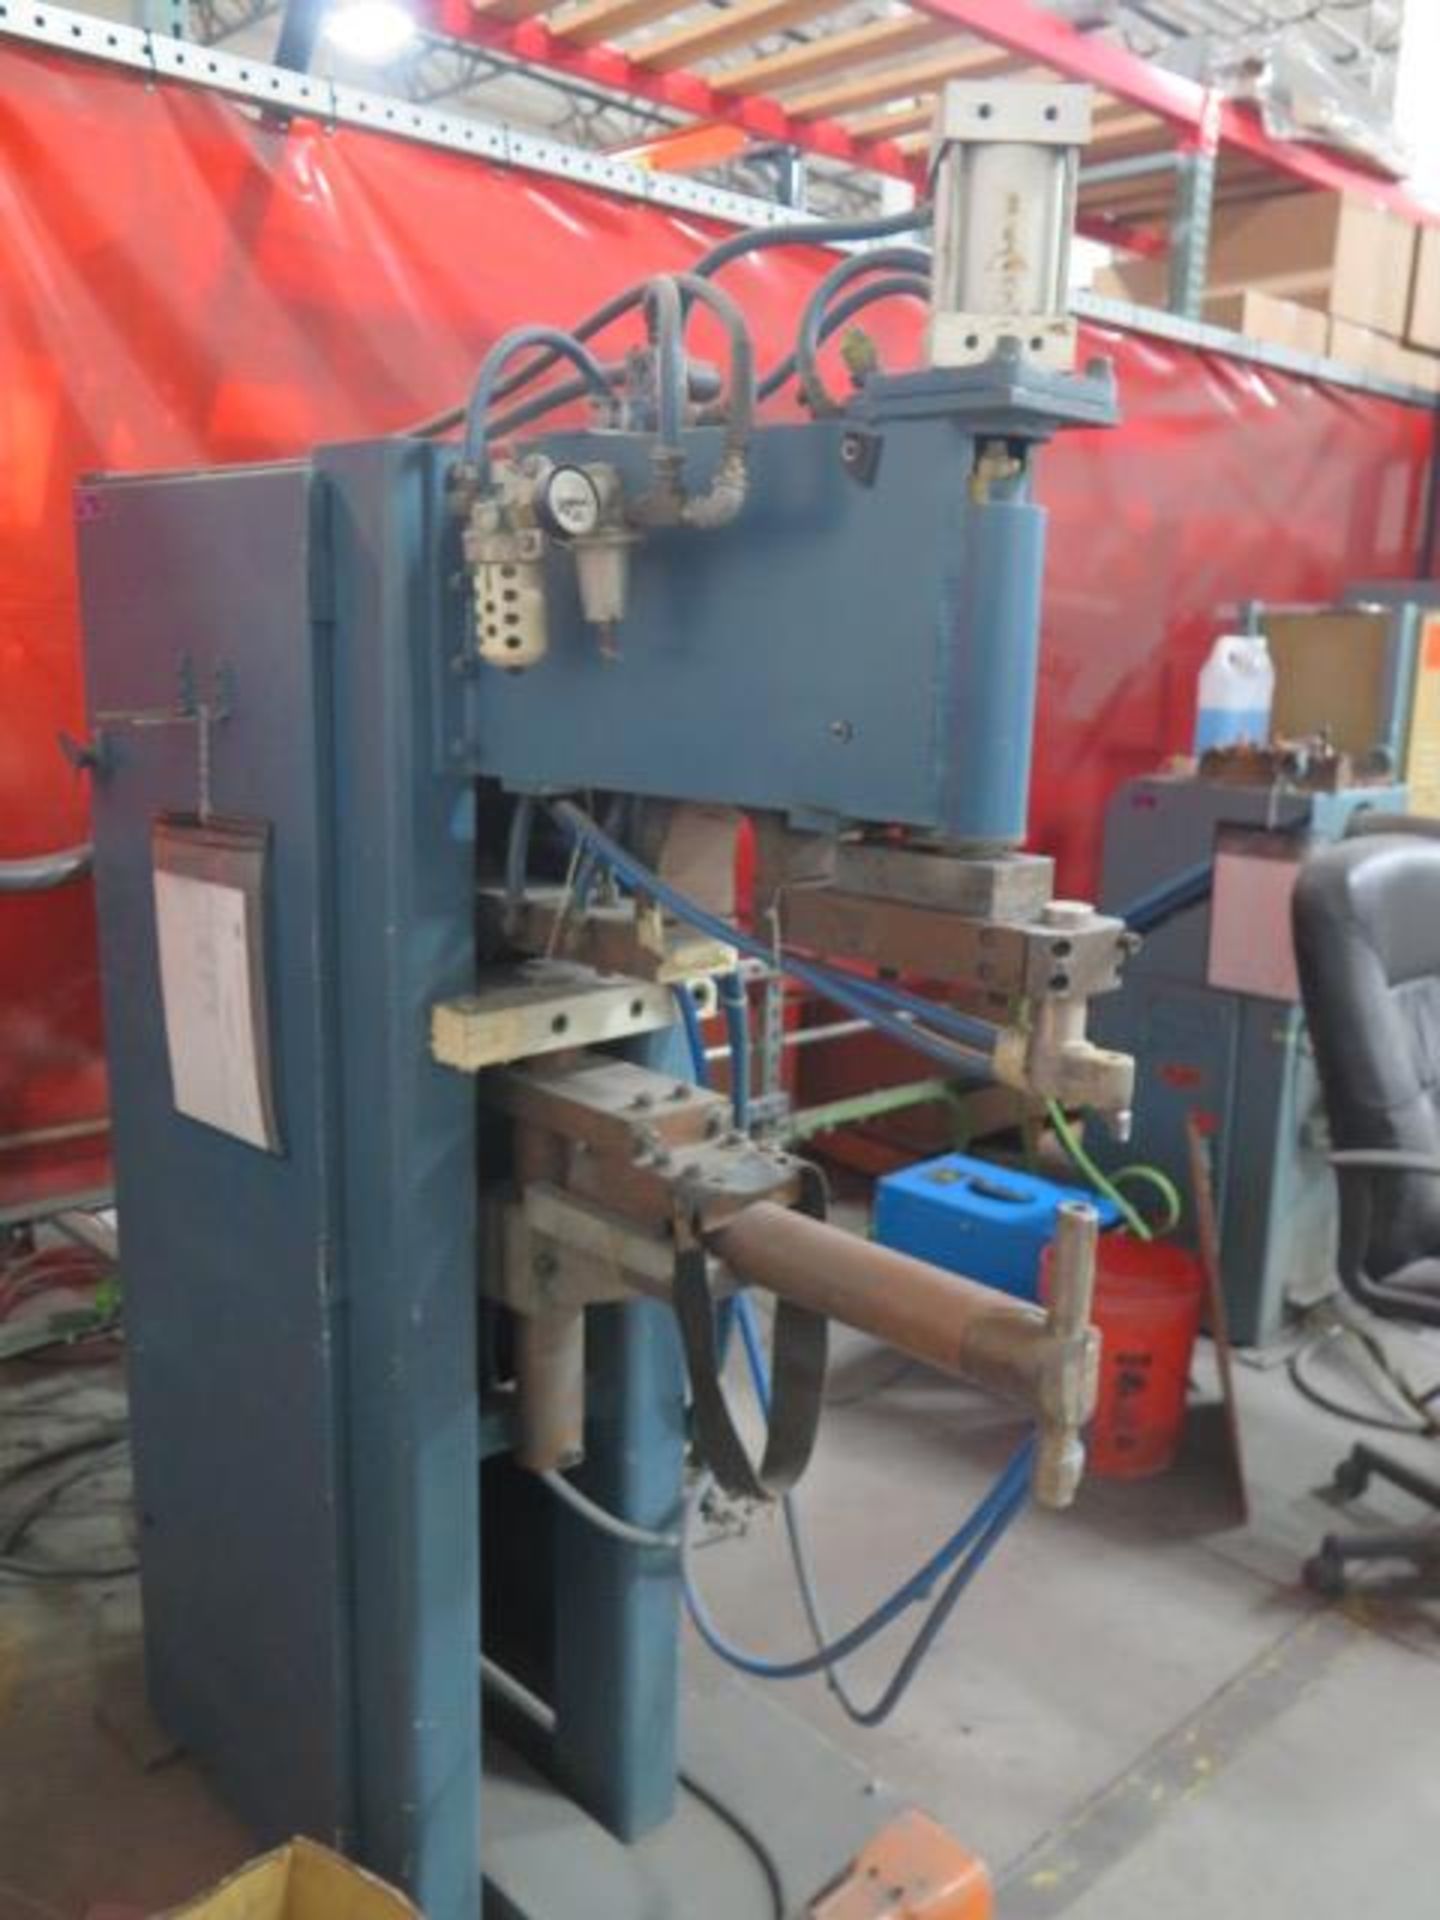 Entron Pneumatic Actuated Spot Welder s/n 10599 w/ Entron Controls (SOLD AS-IS - NO WARRANTY) - Image 2 of 10